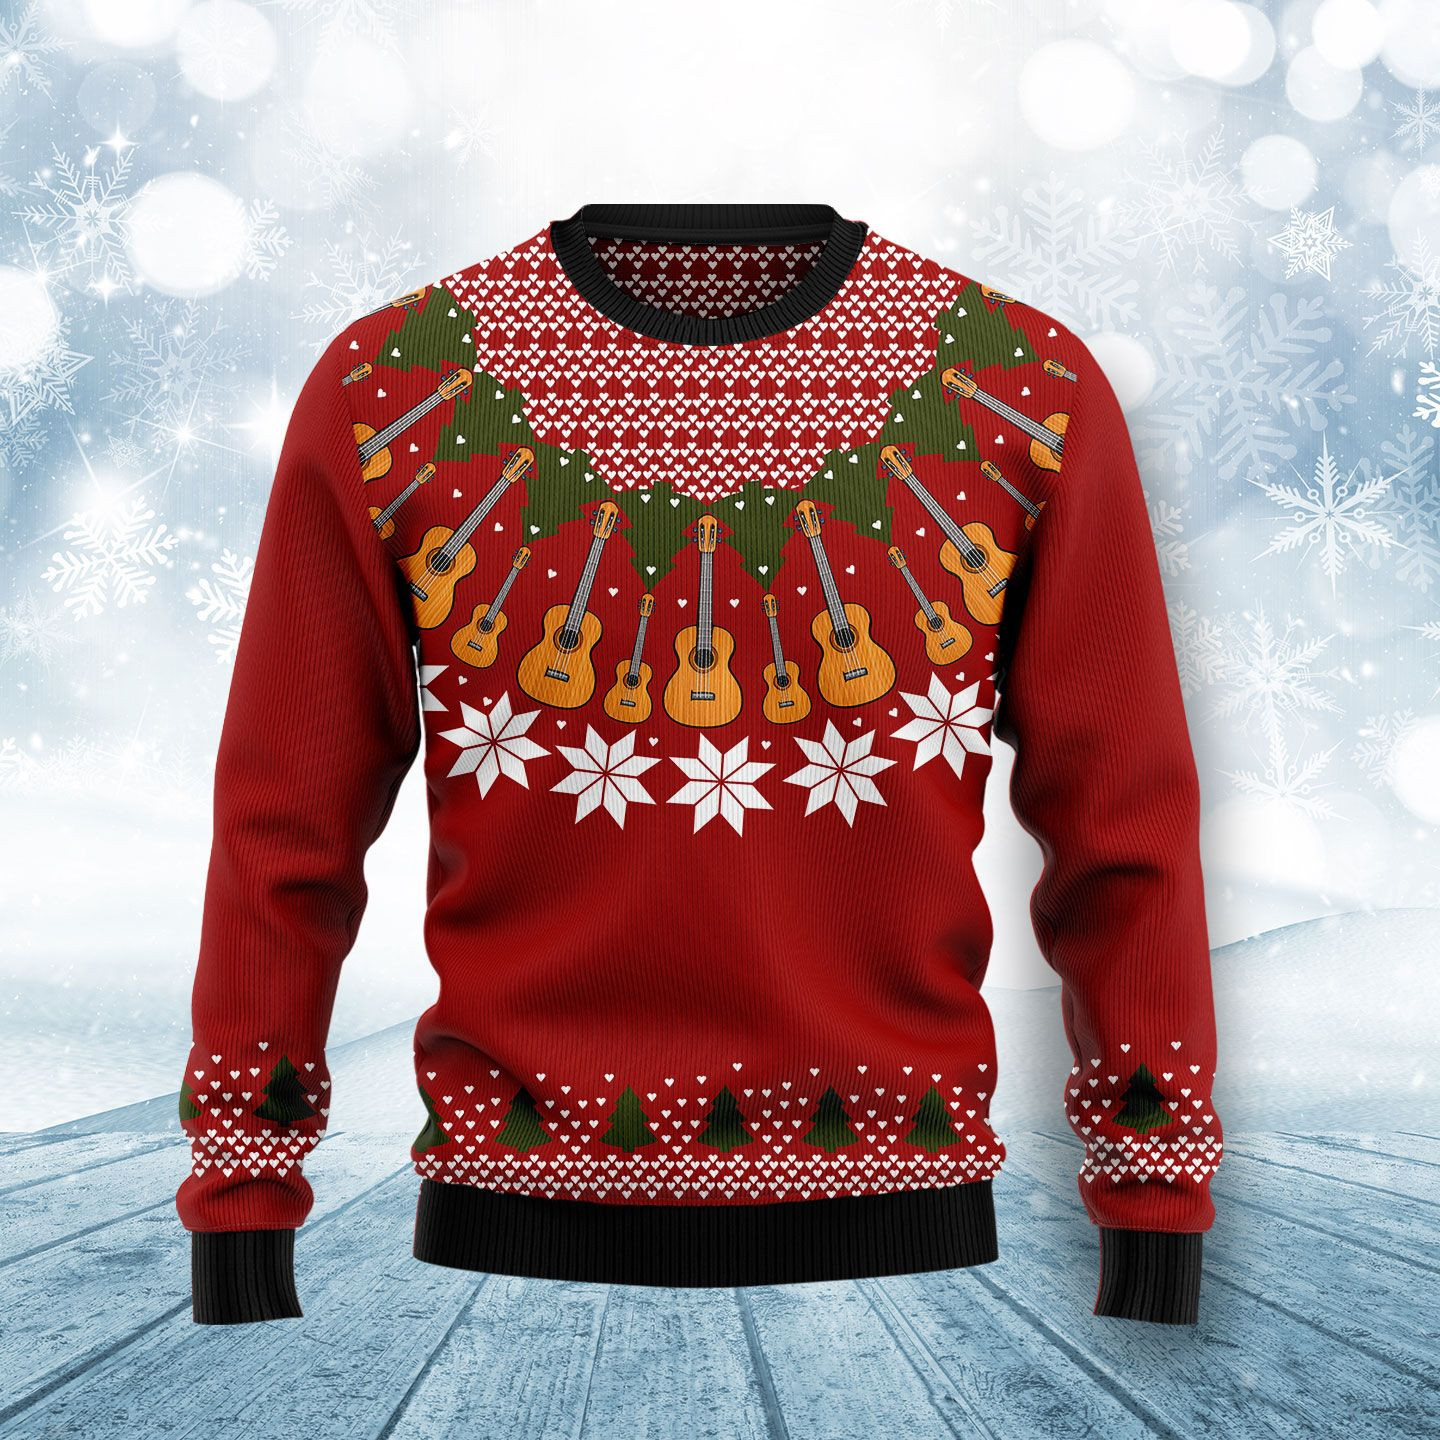 Guitar Lover Ugly Christmas Sweater Ugly Sweater For Men Women